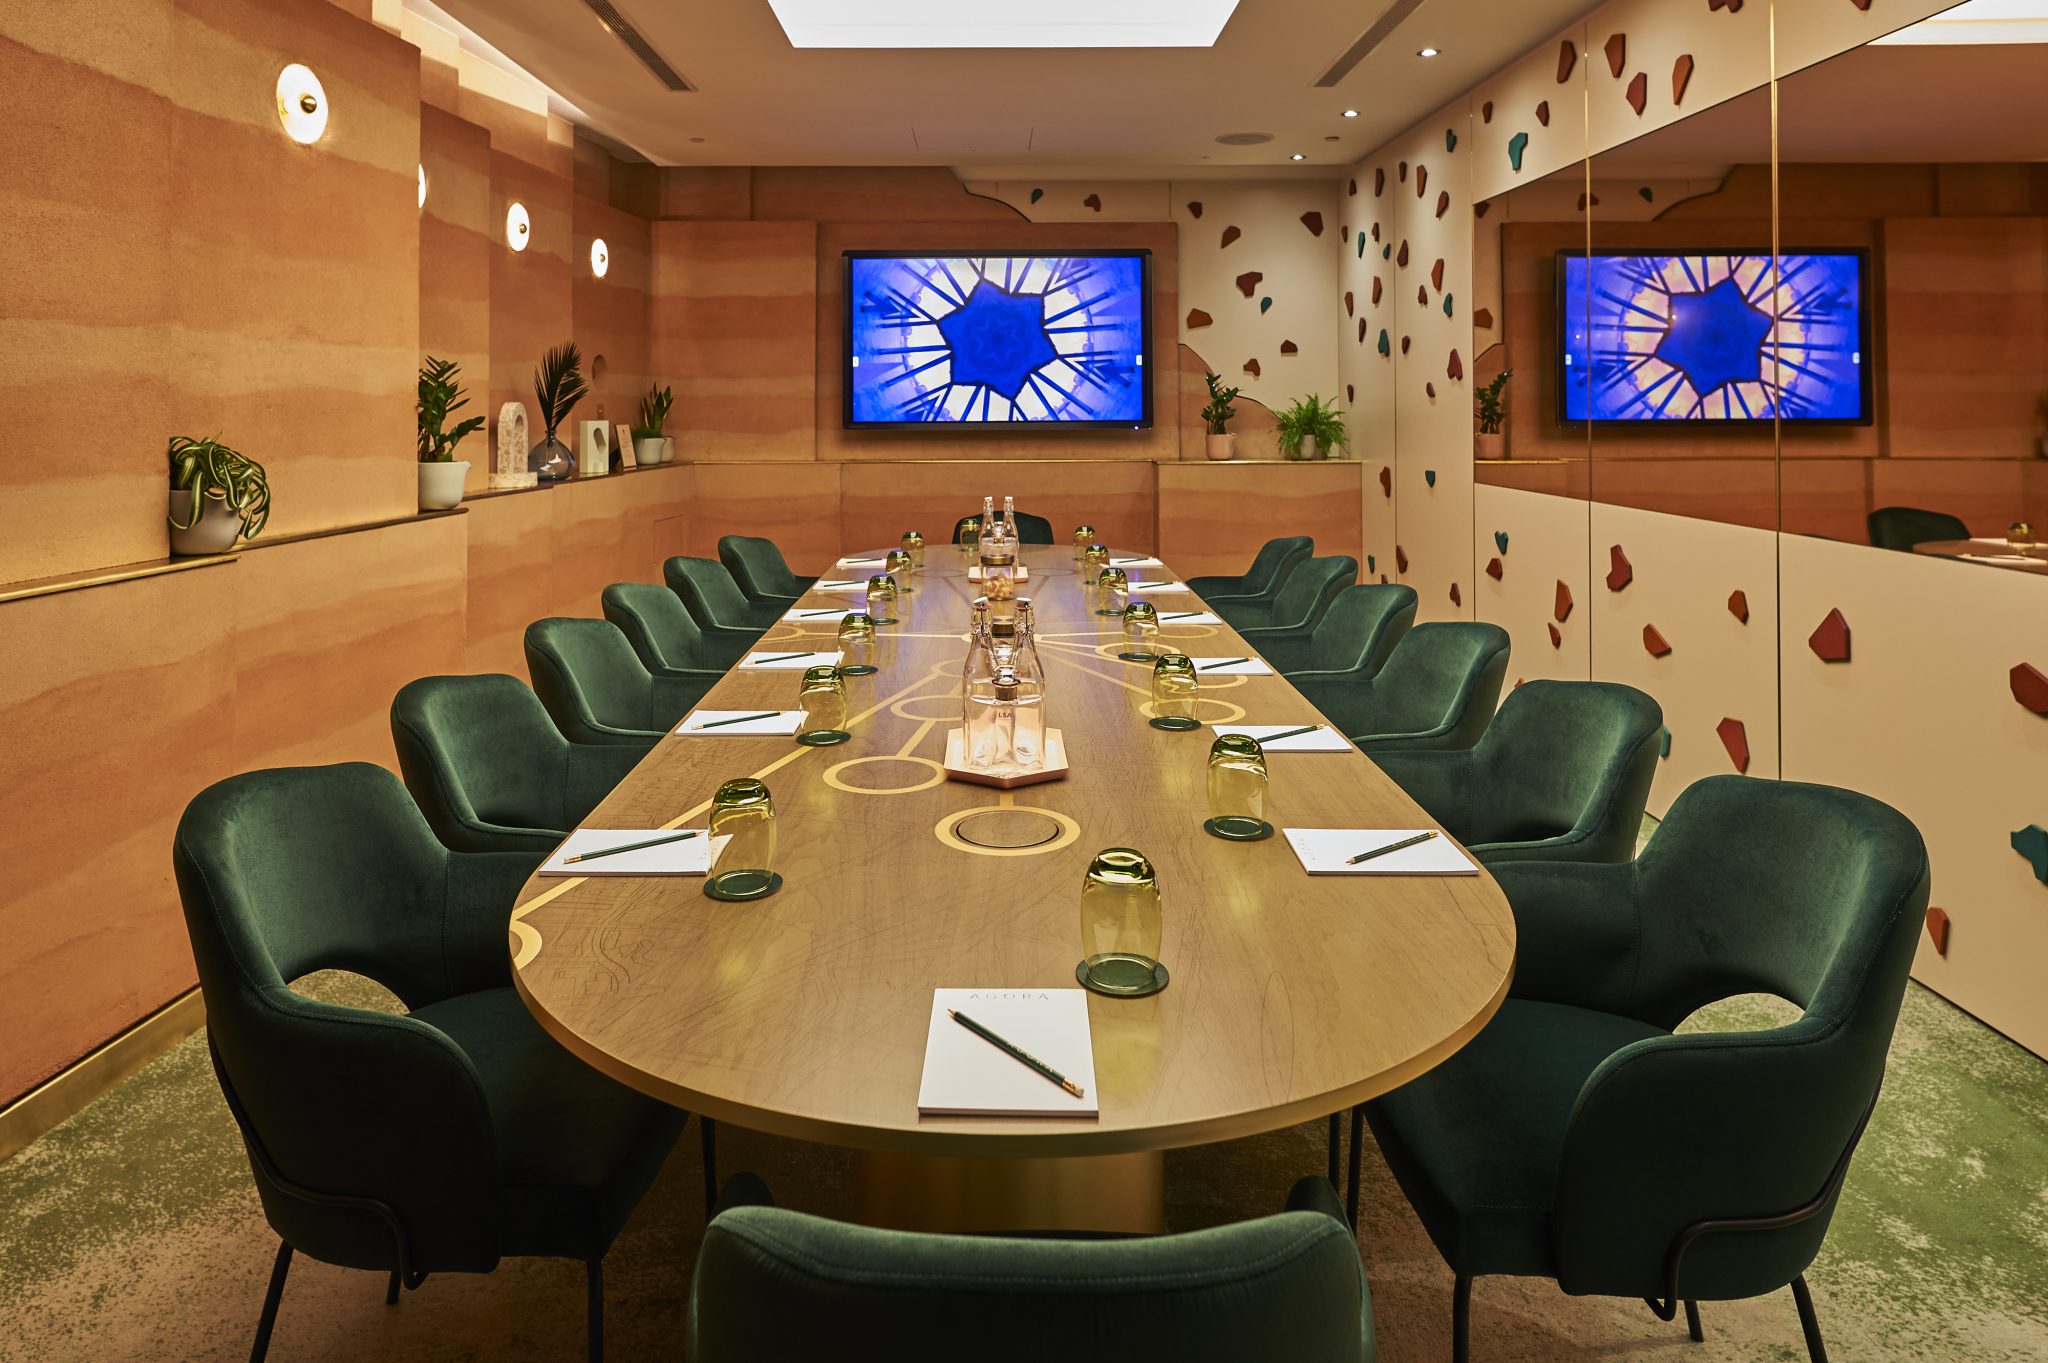 FLAGSHIP DESIGN HOTEL, HILTON LONDON BANKSIDE UNVEILS ‘THE AGORA’ – THE BEST MEETING ROOM IN THE WORLD, IN A PARTNERSHIP WITH BOMPAS & PARR